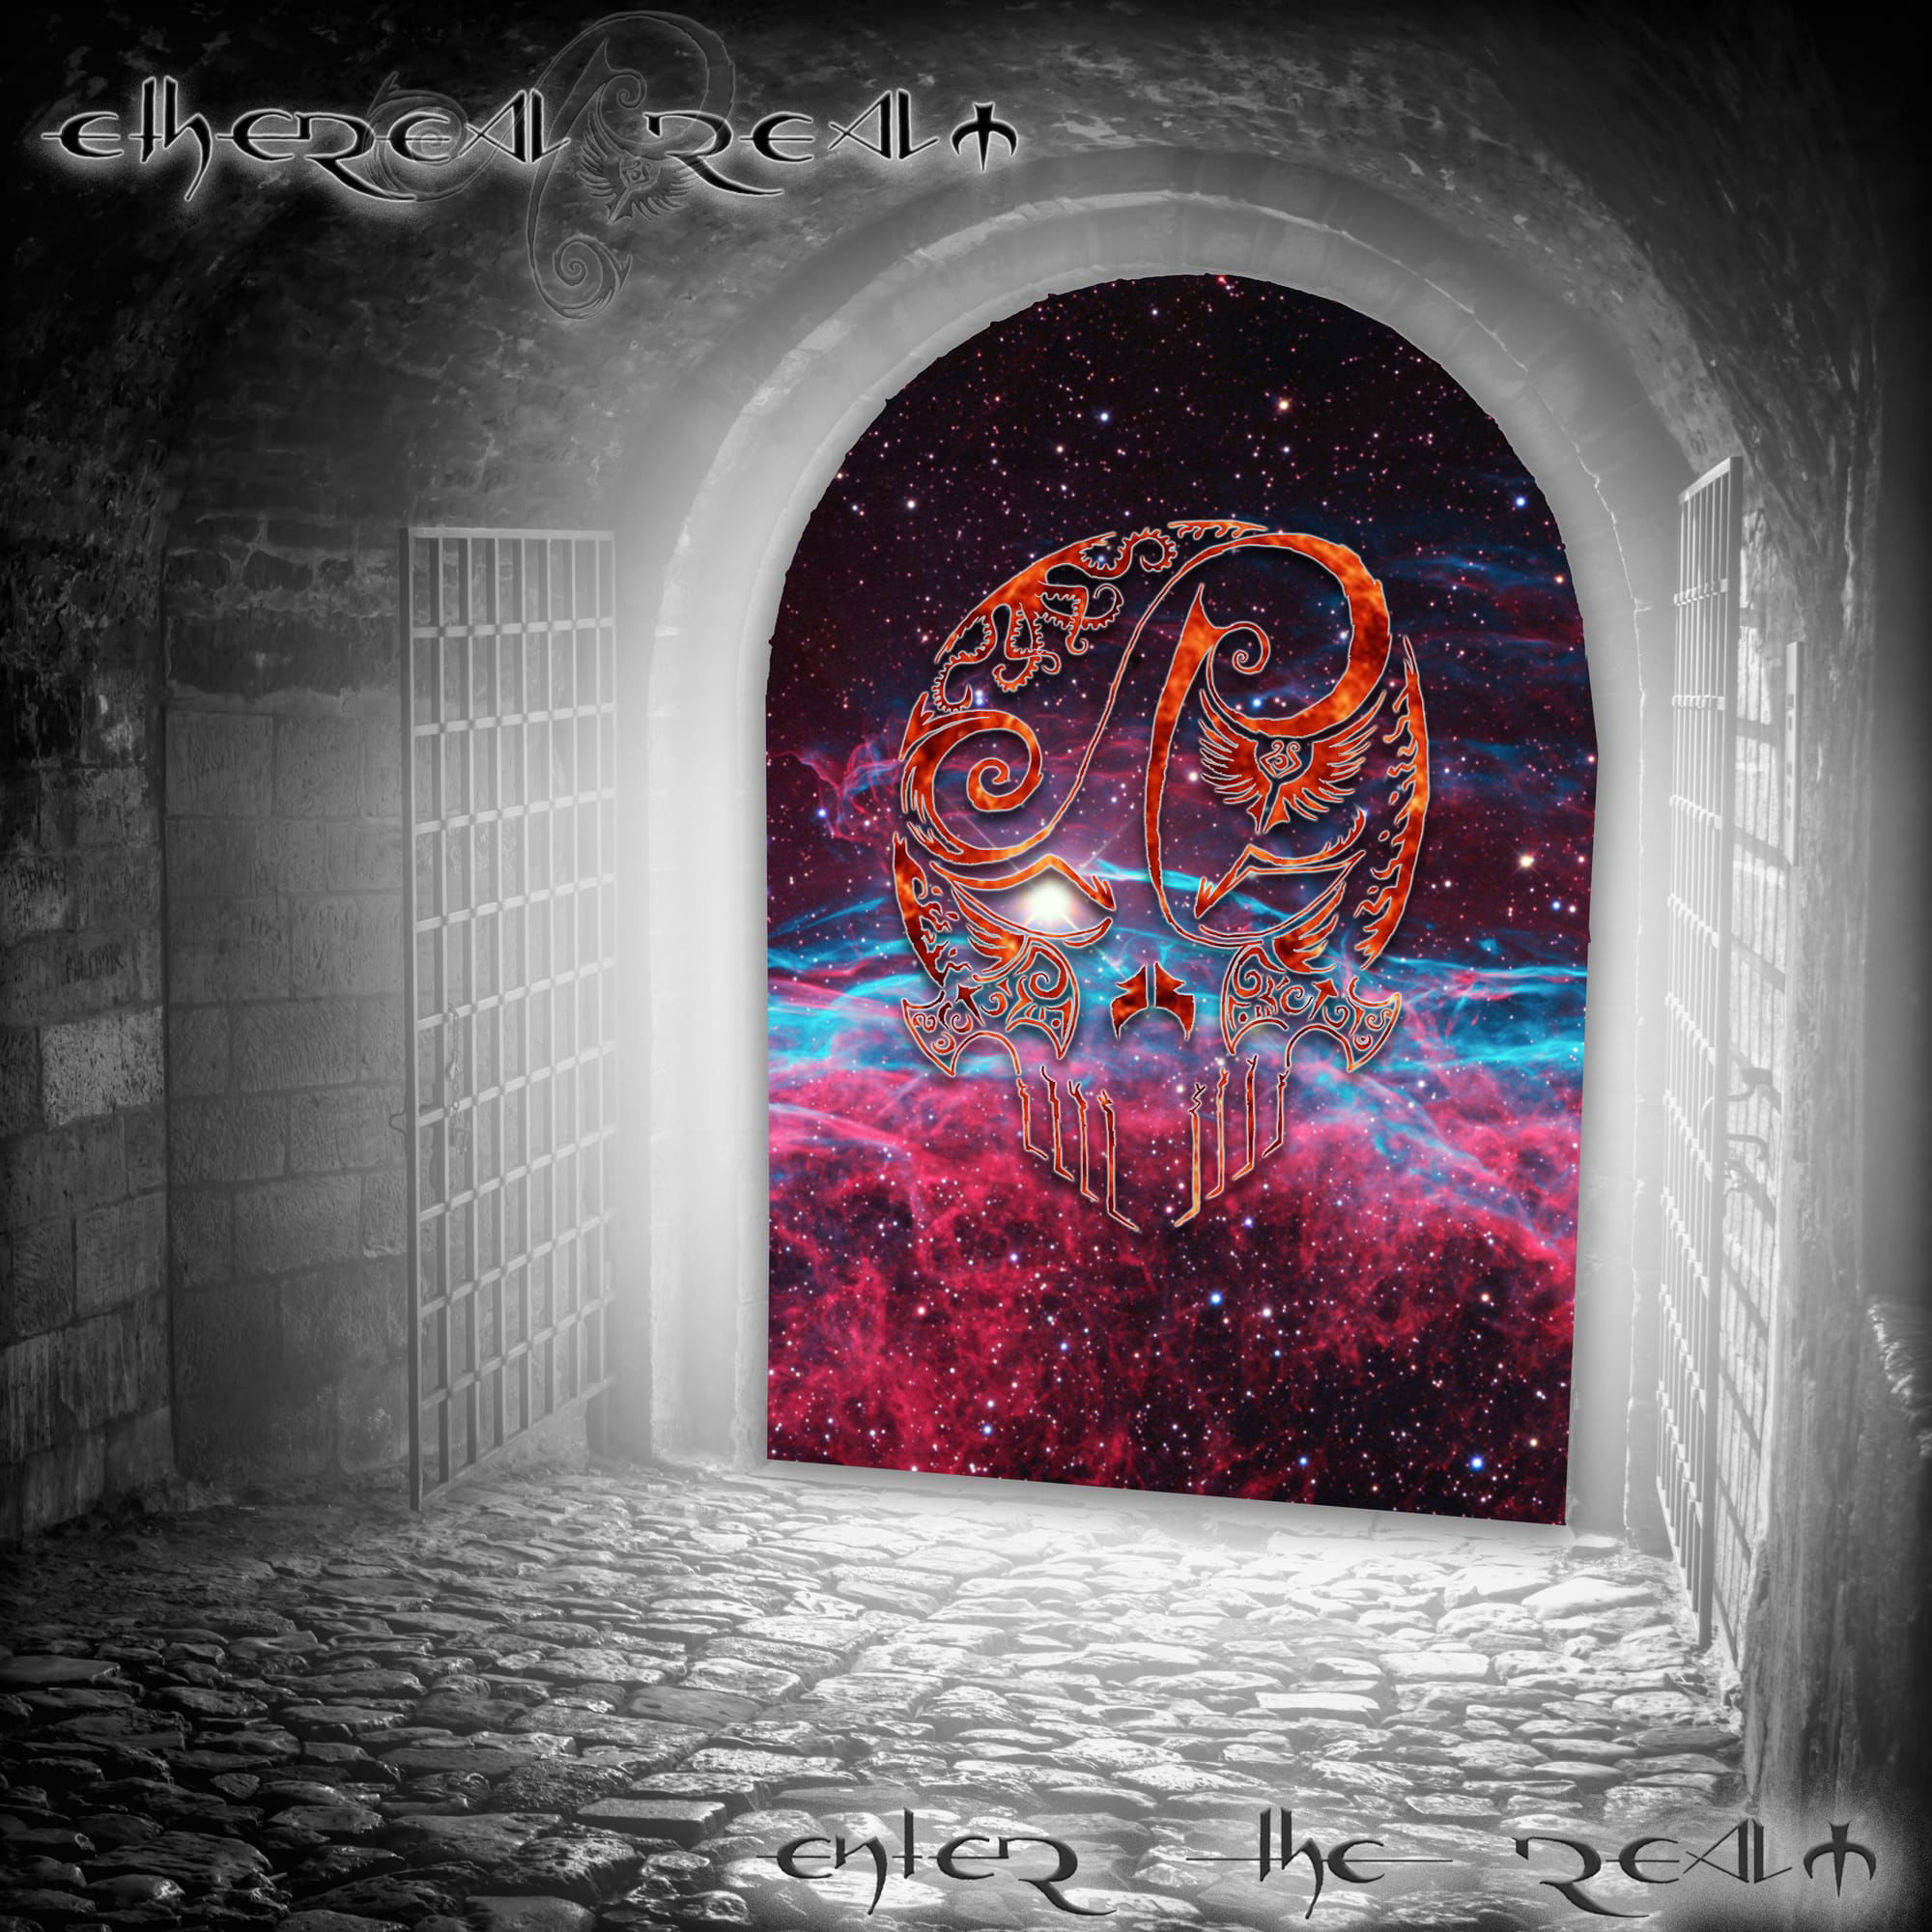 Interview with ETHEREAL REALM